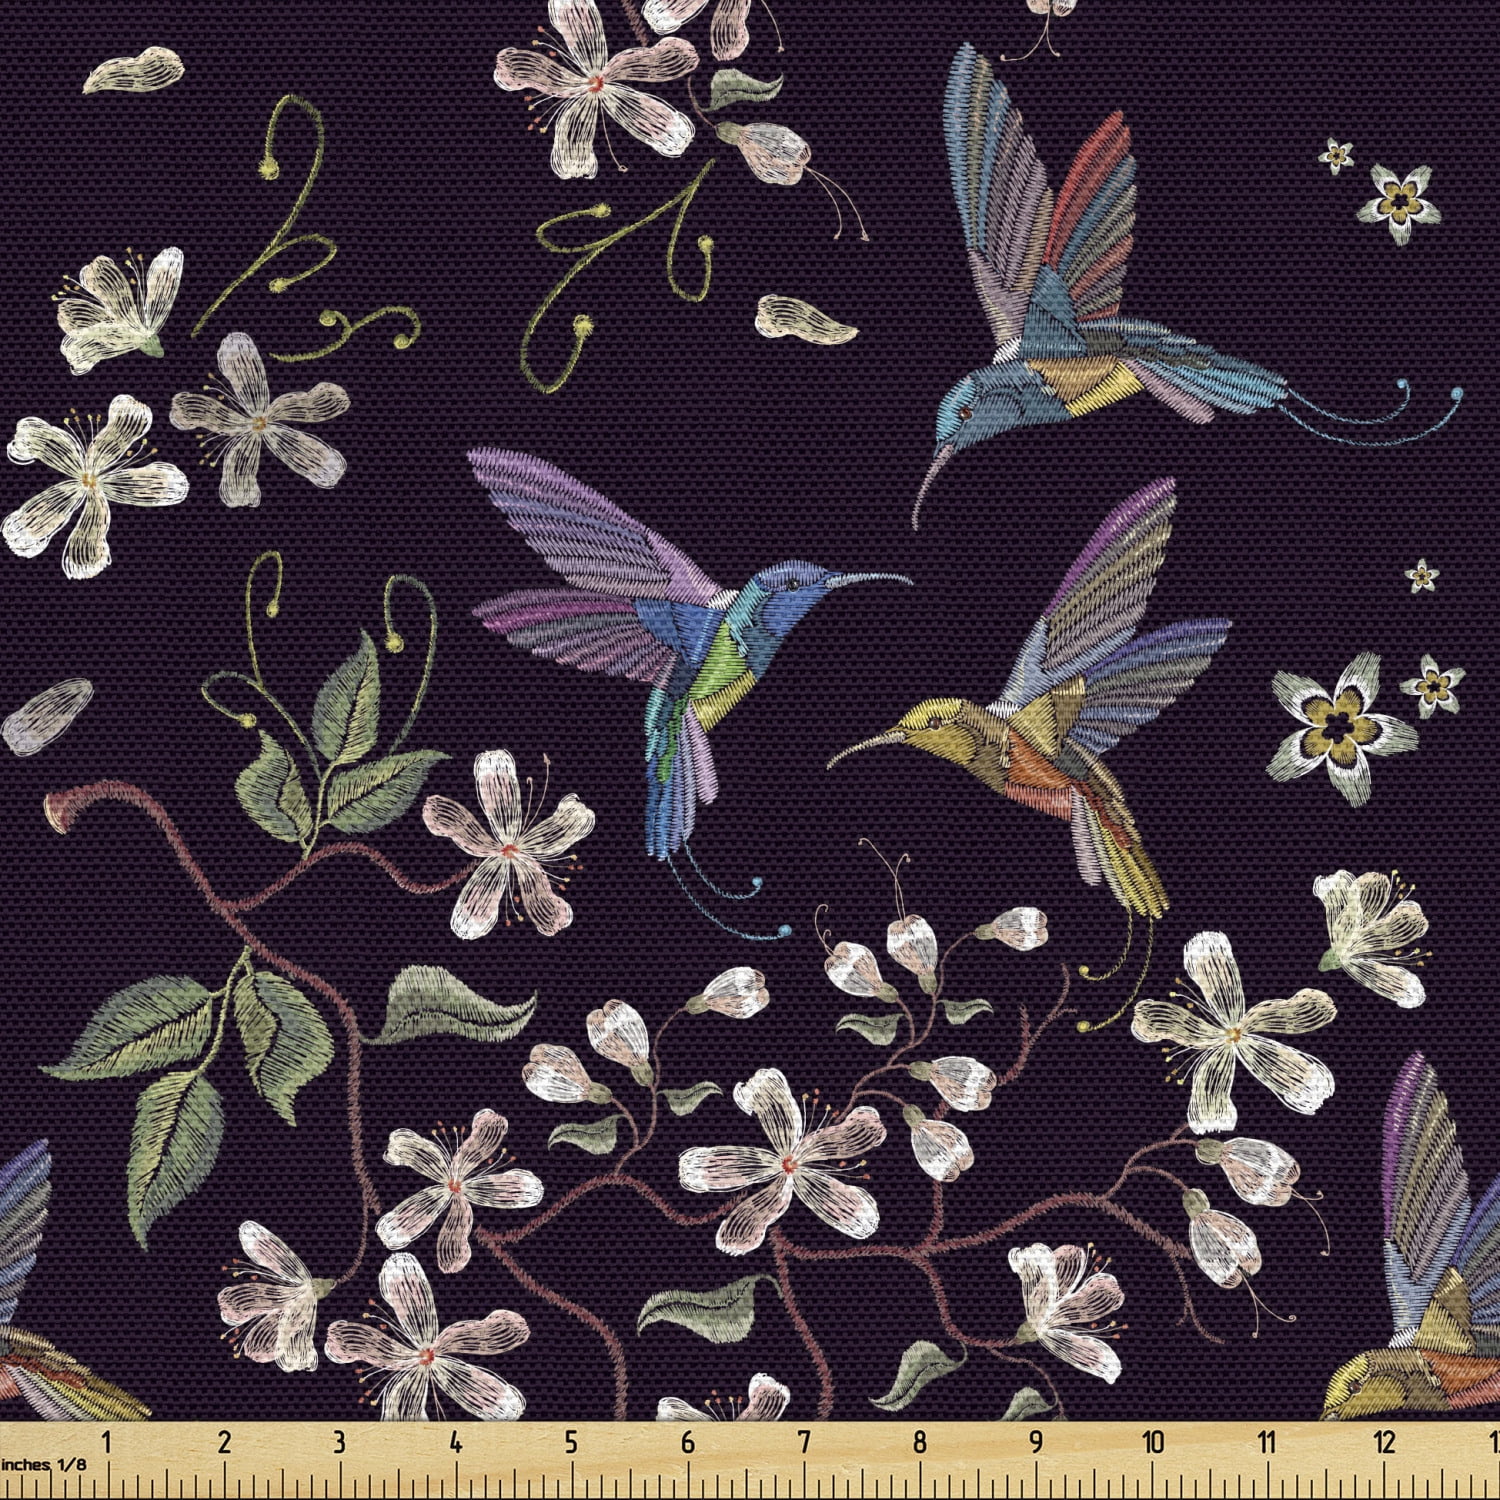 Drapery Upholstery Fabric Birds and Berries Embroidered Jacquard Black Multi 